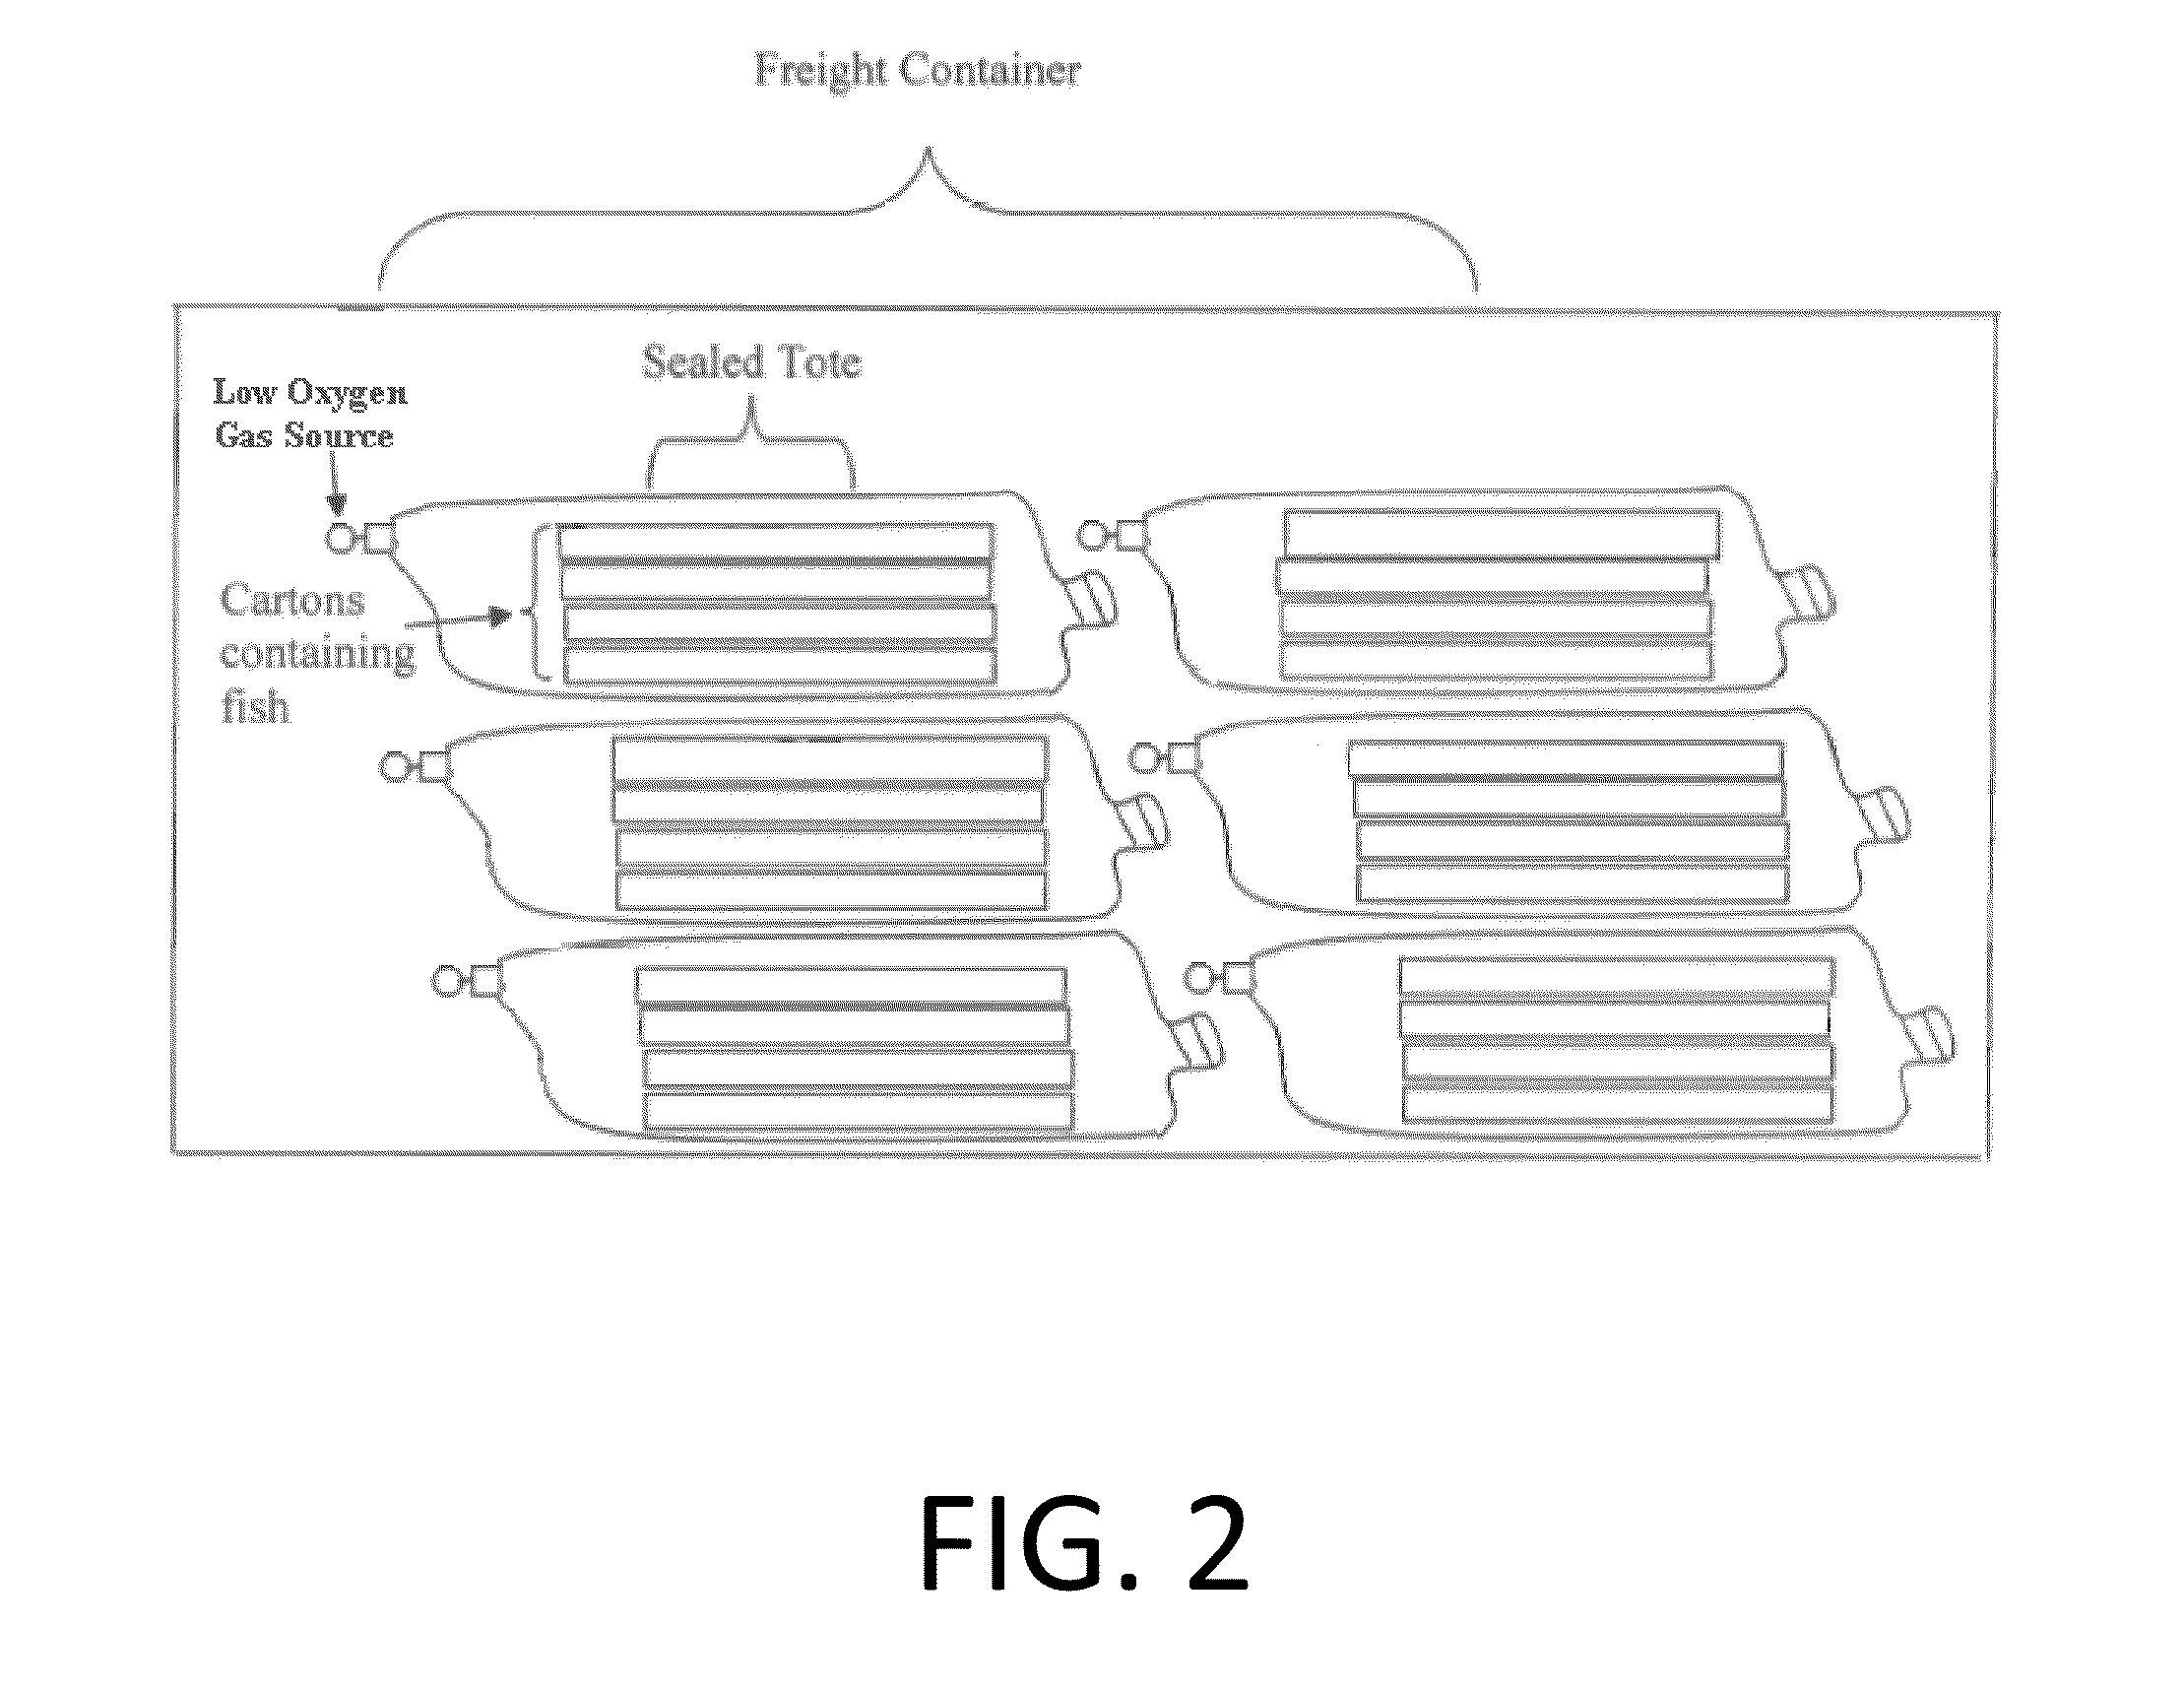 System and method for maintaining perishable foods